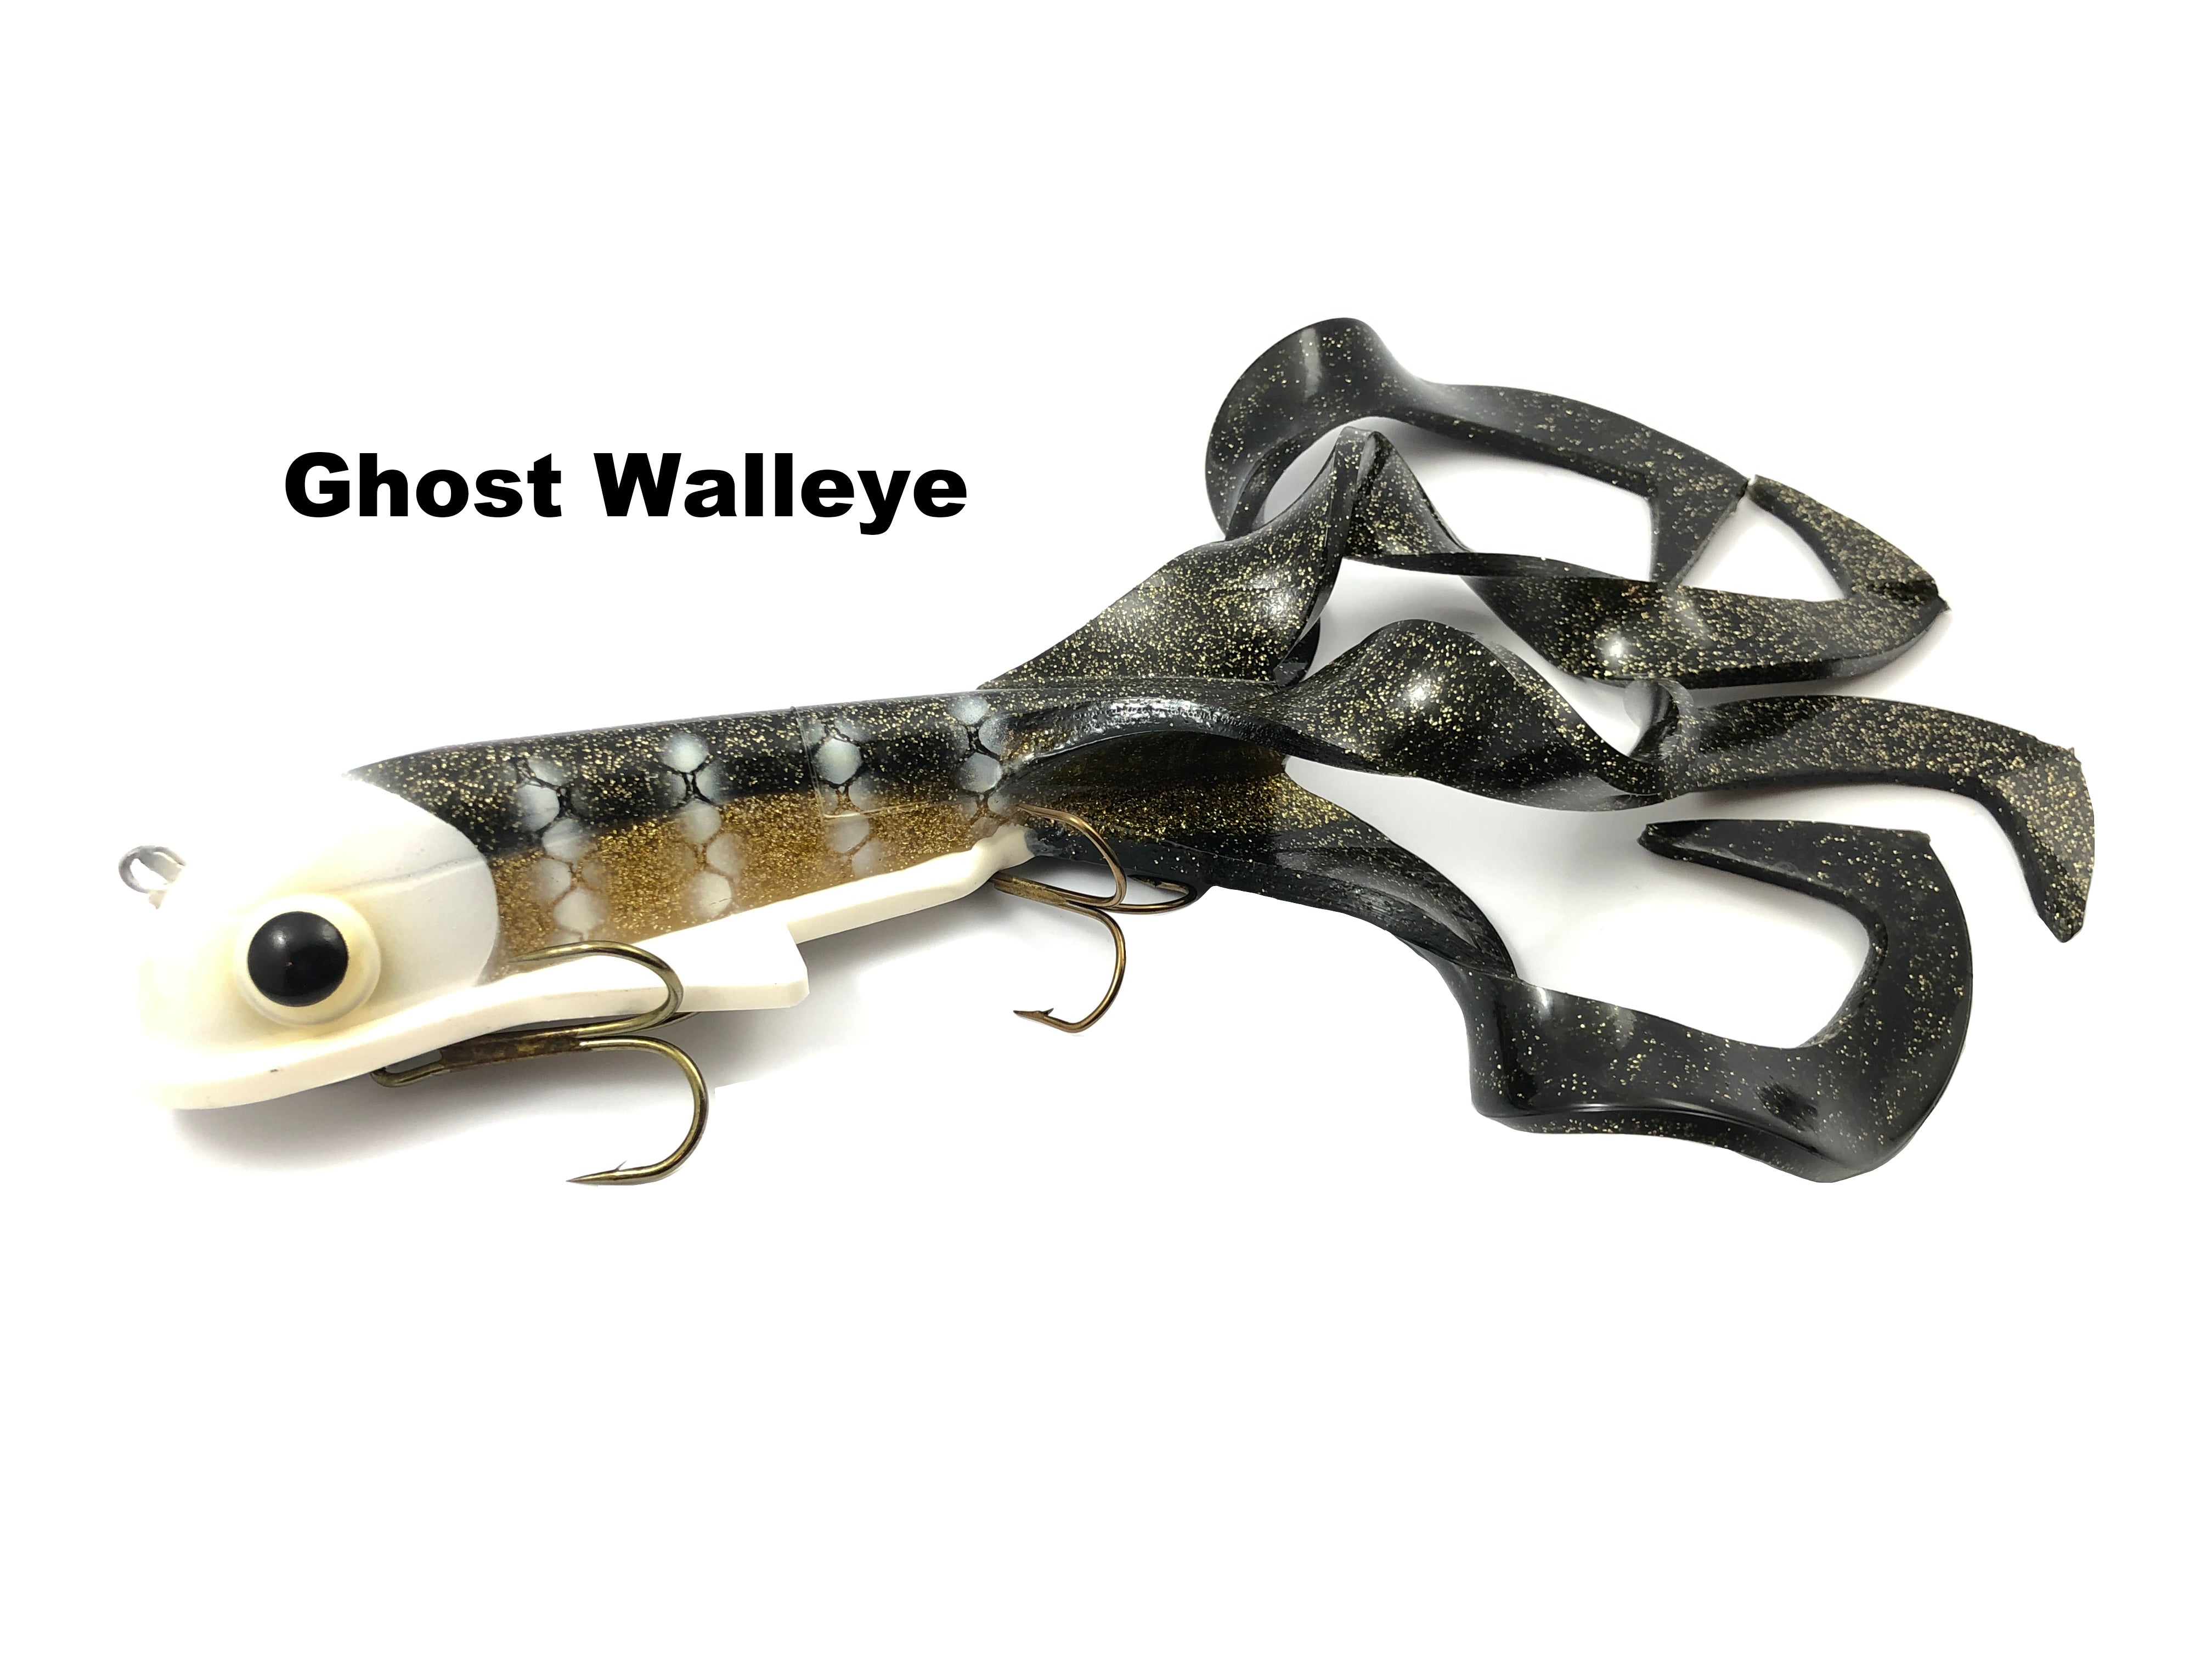 Musky Tackle Online